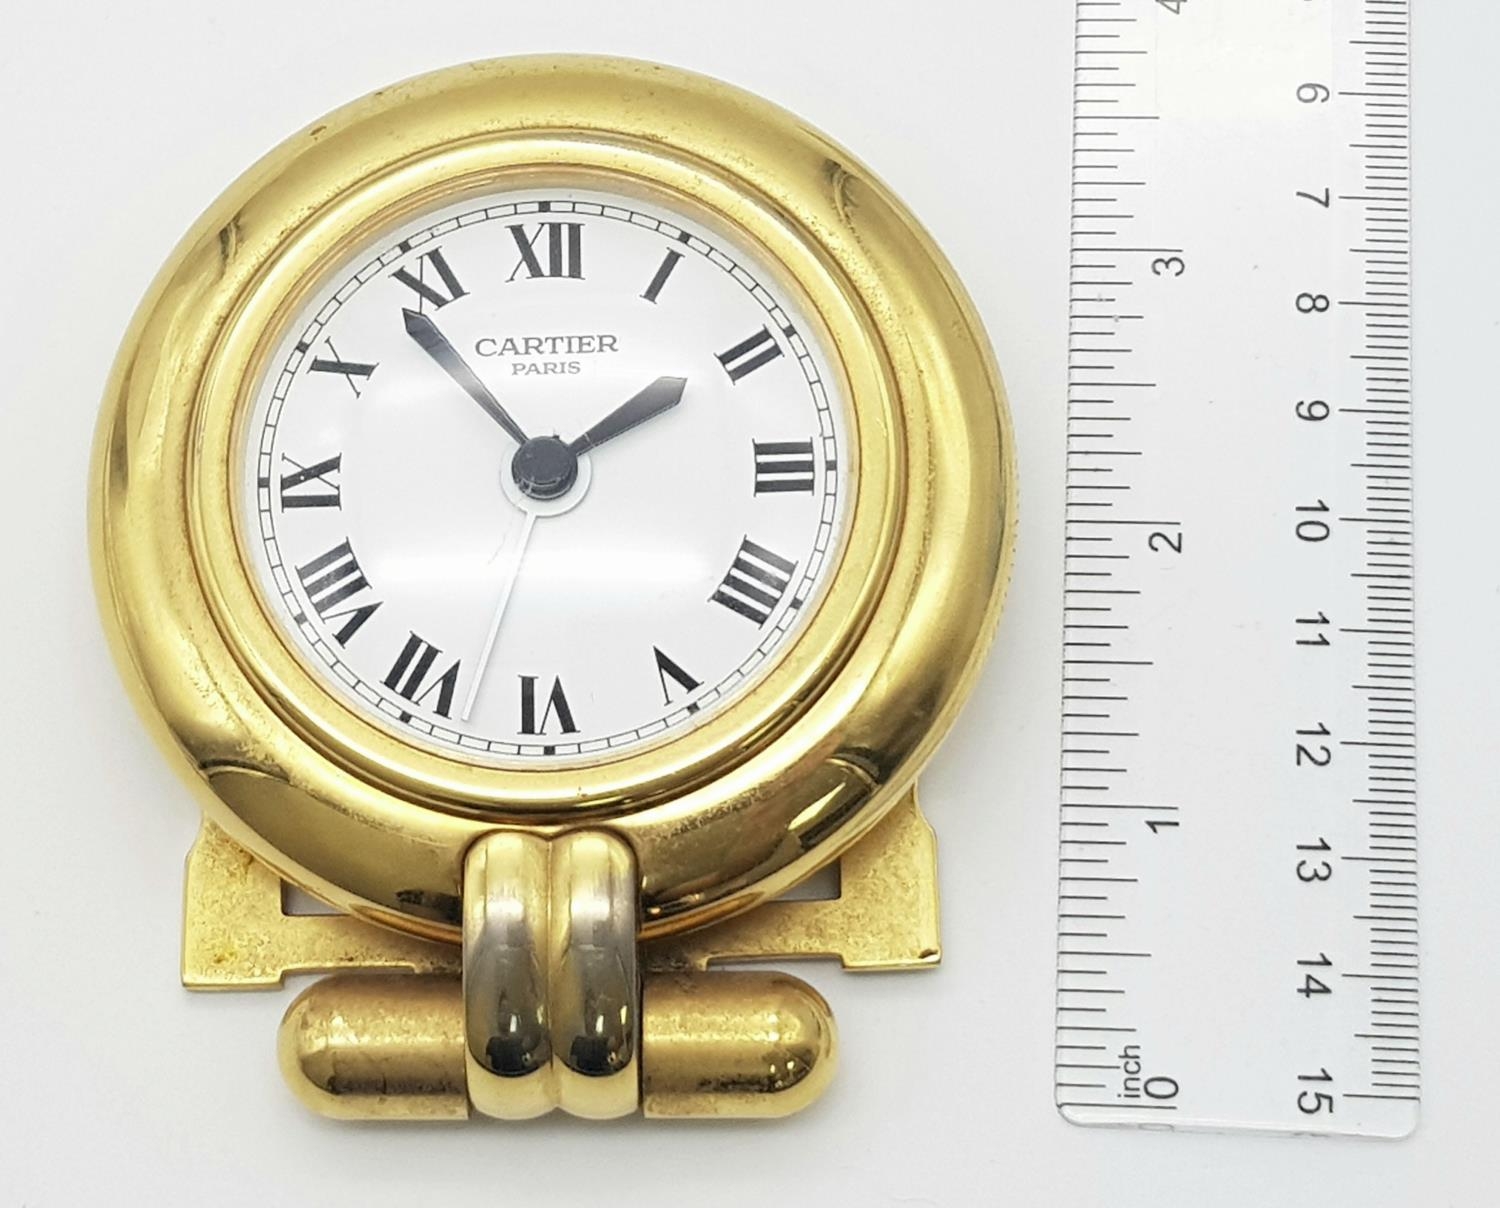 A Gold Plated Cartier Colisee Art Deco Travel Desk Clock. White dial with Roman numerals. 78mm - Image 6 of 8